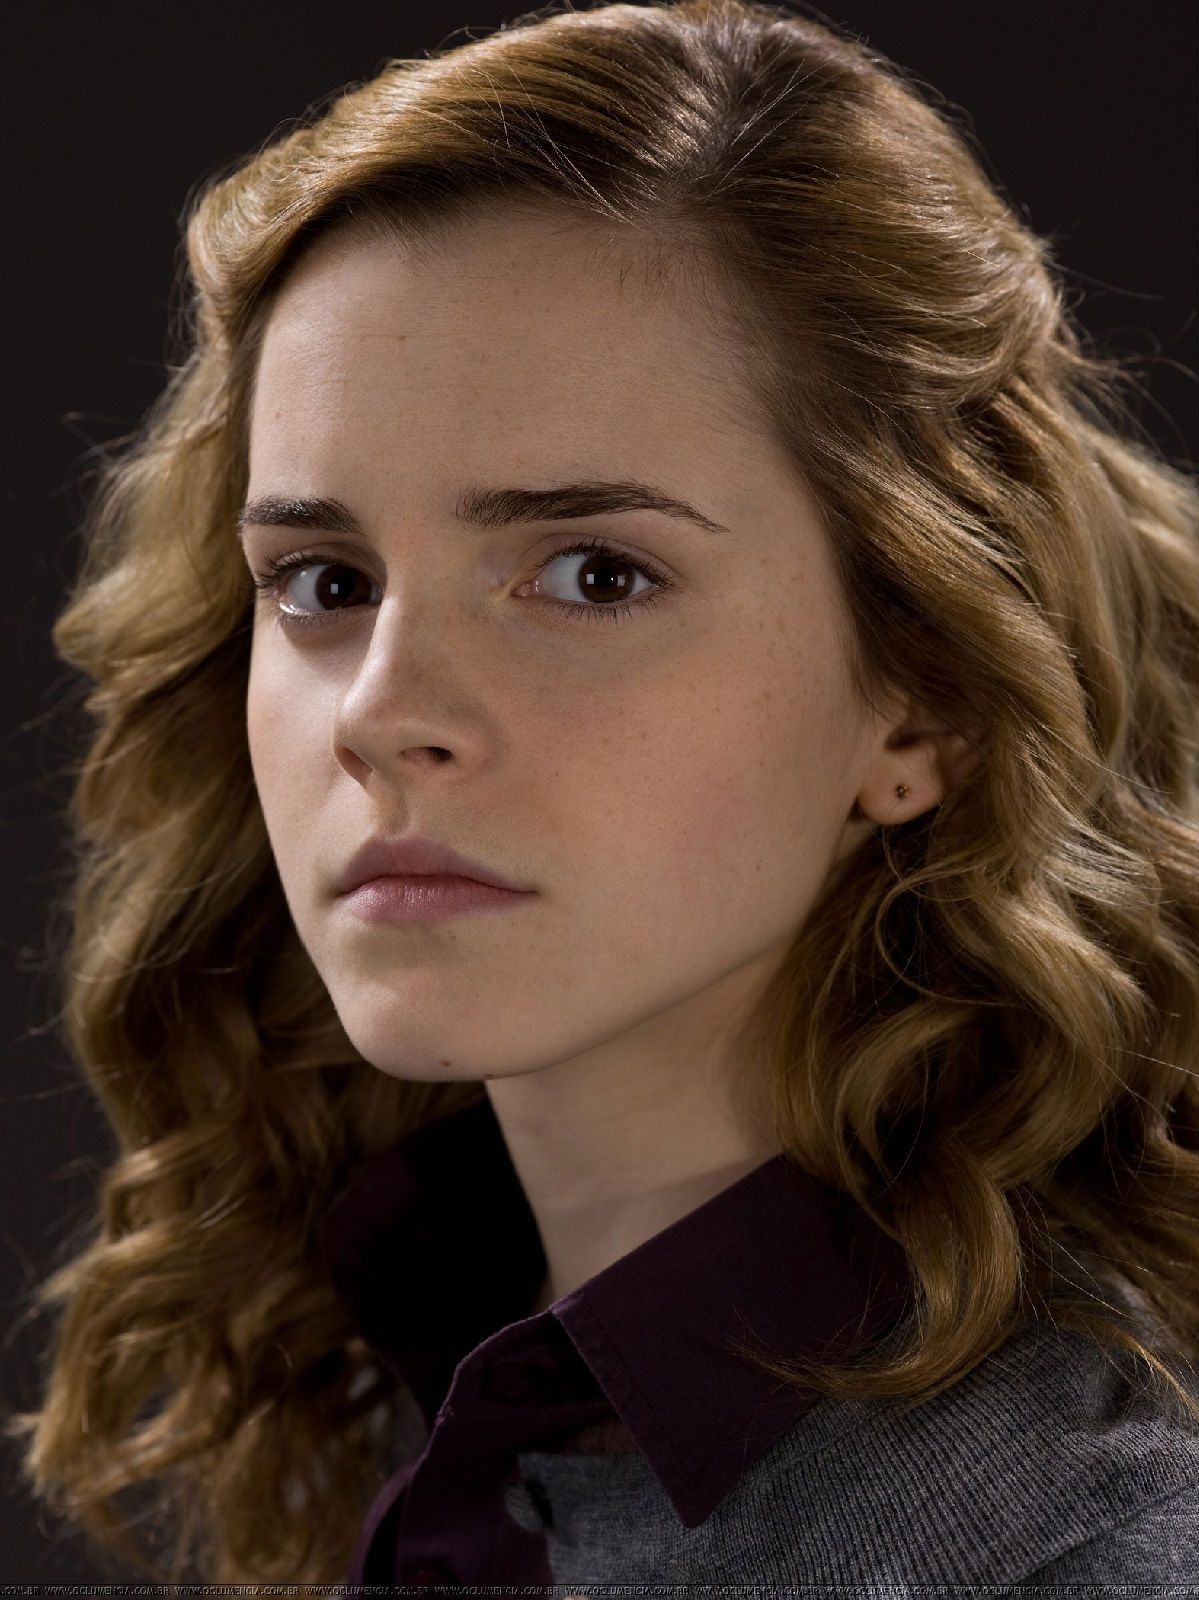 chad giles share images of hermione in harry potter photos